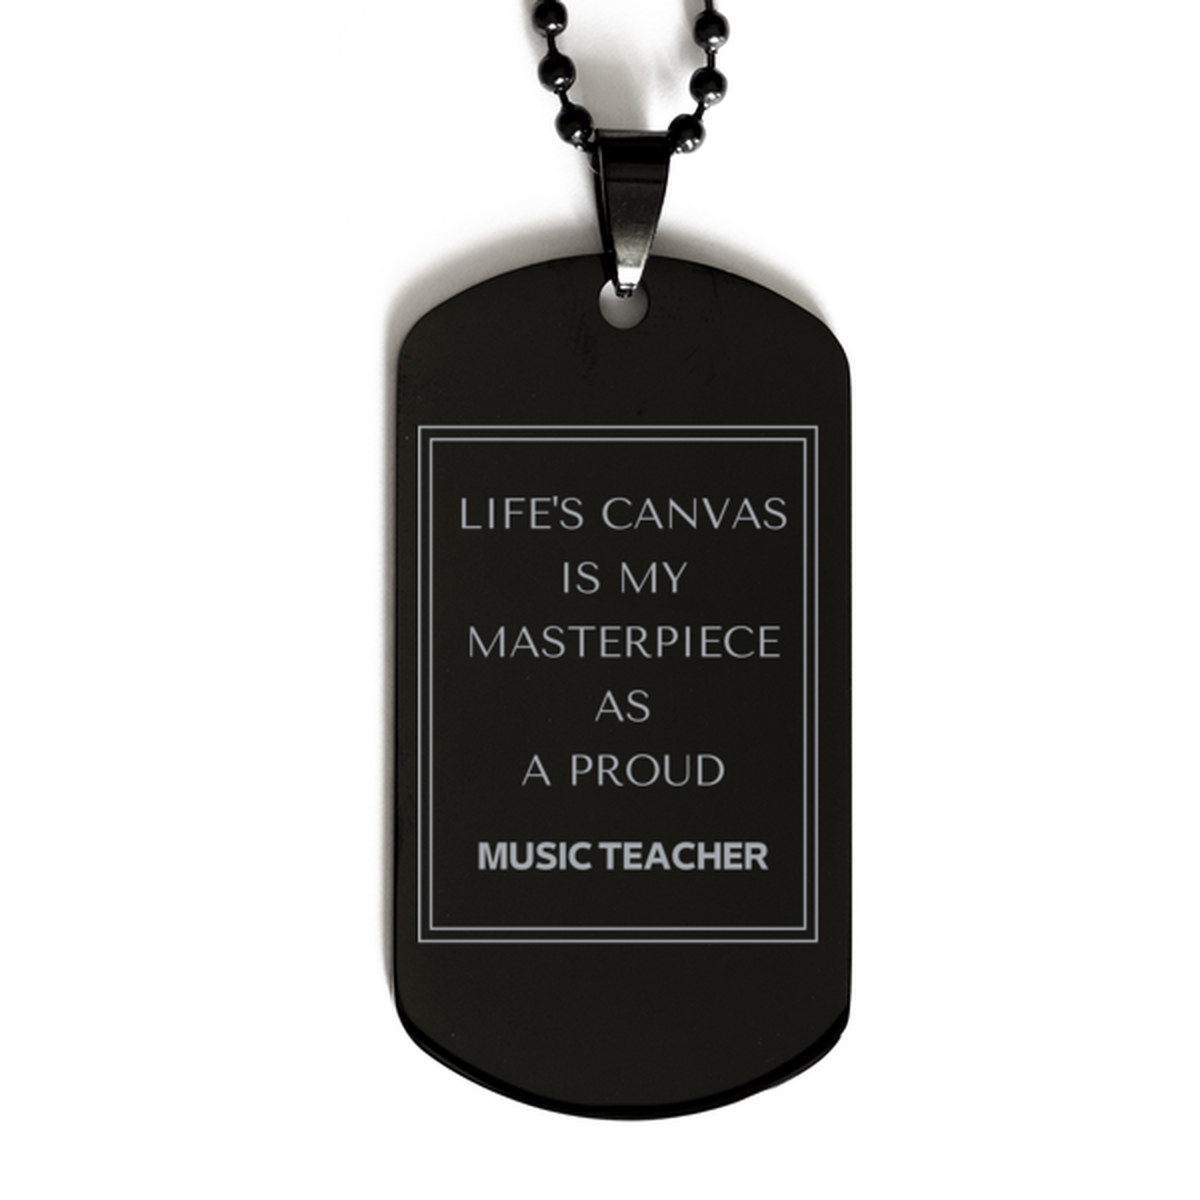 Proud Music Teacher Gifts, Life's canvas is my masterpiece, Epic Birthday Christmas Unique Black Dog Tag For Music Teacher, Coworkers, Men, Women, Friends